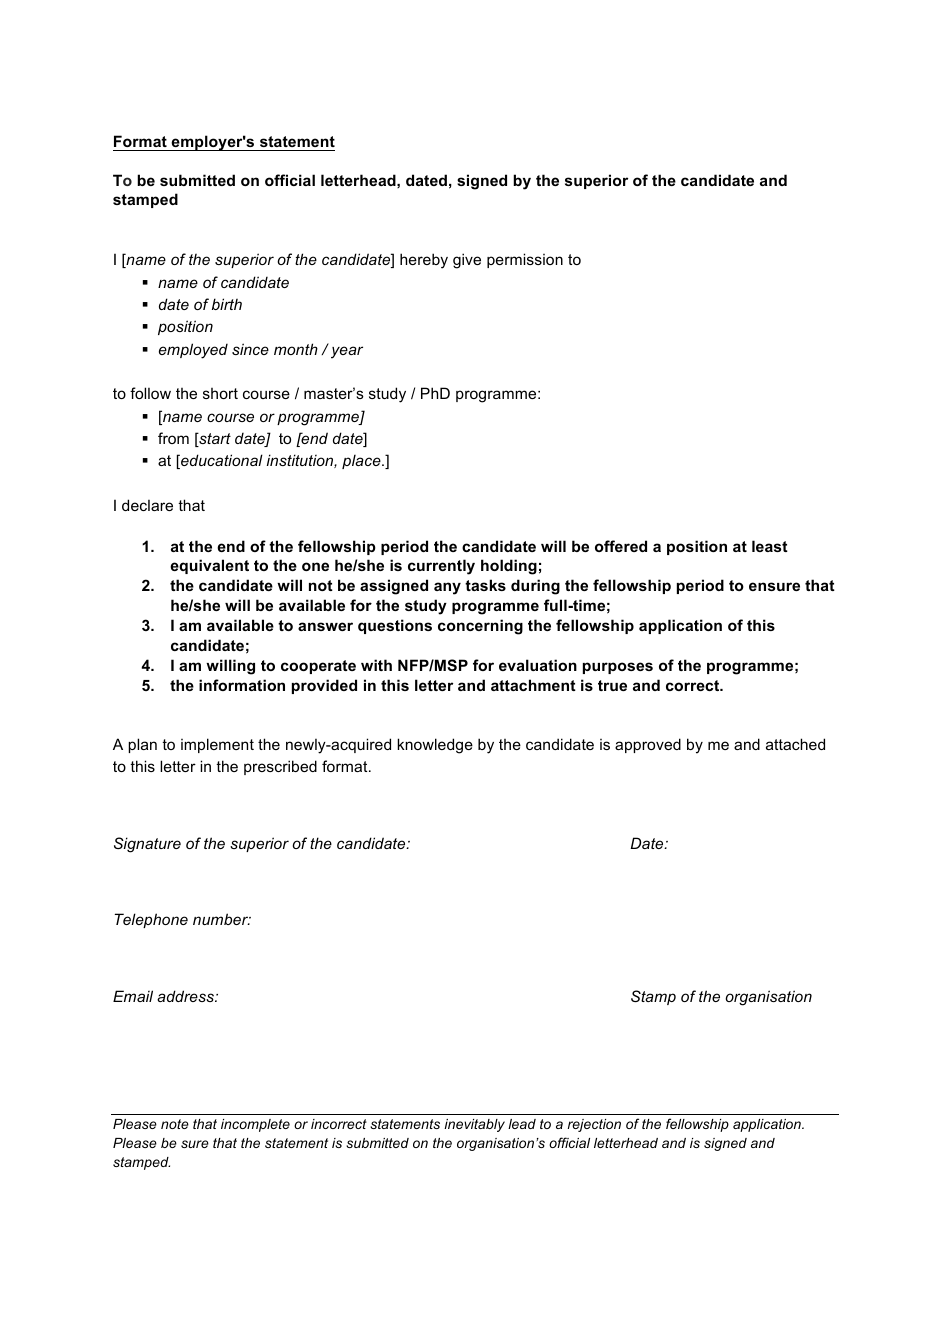 sample-employer-s-statement-template-download-printable-pdf